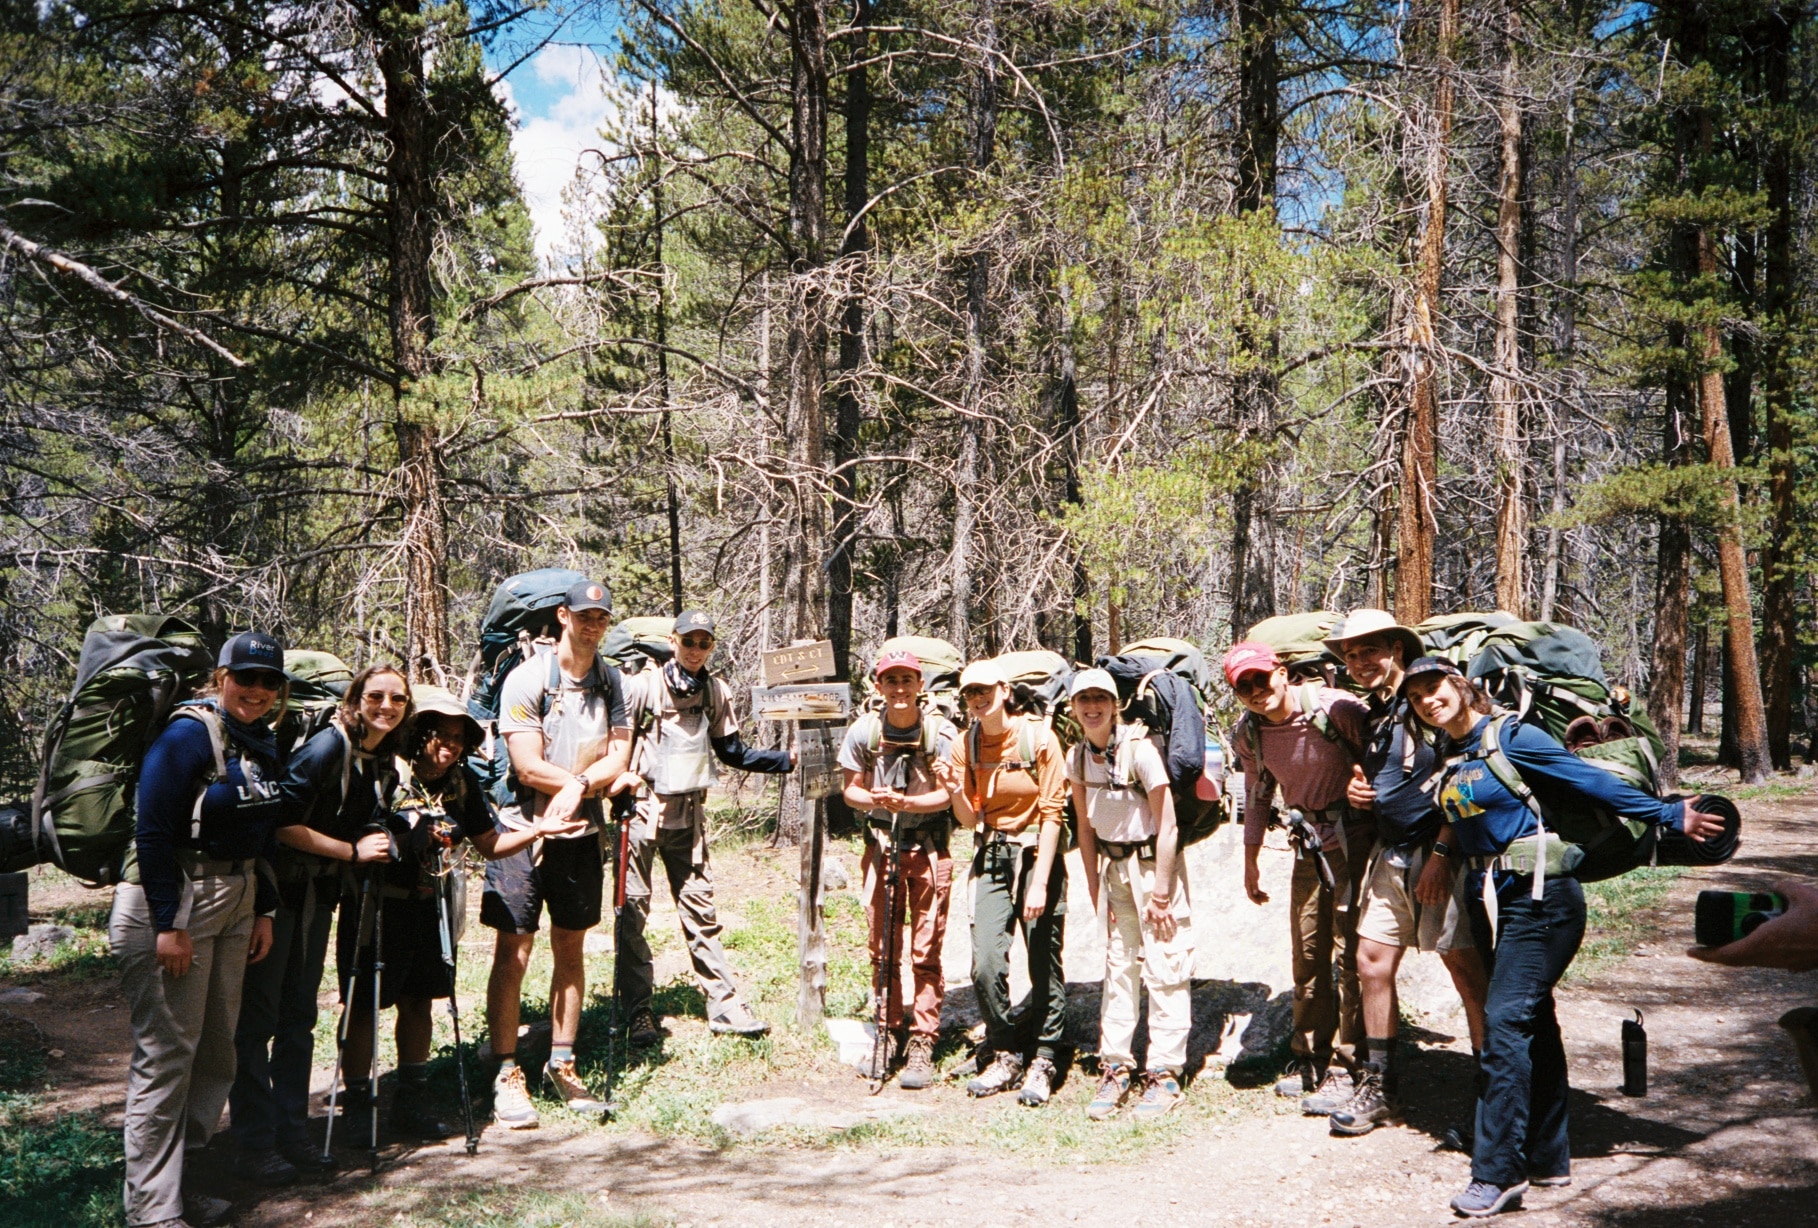 Group photo before starting hike